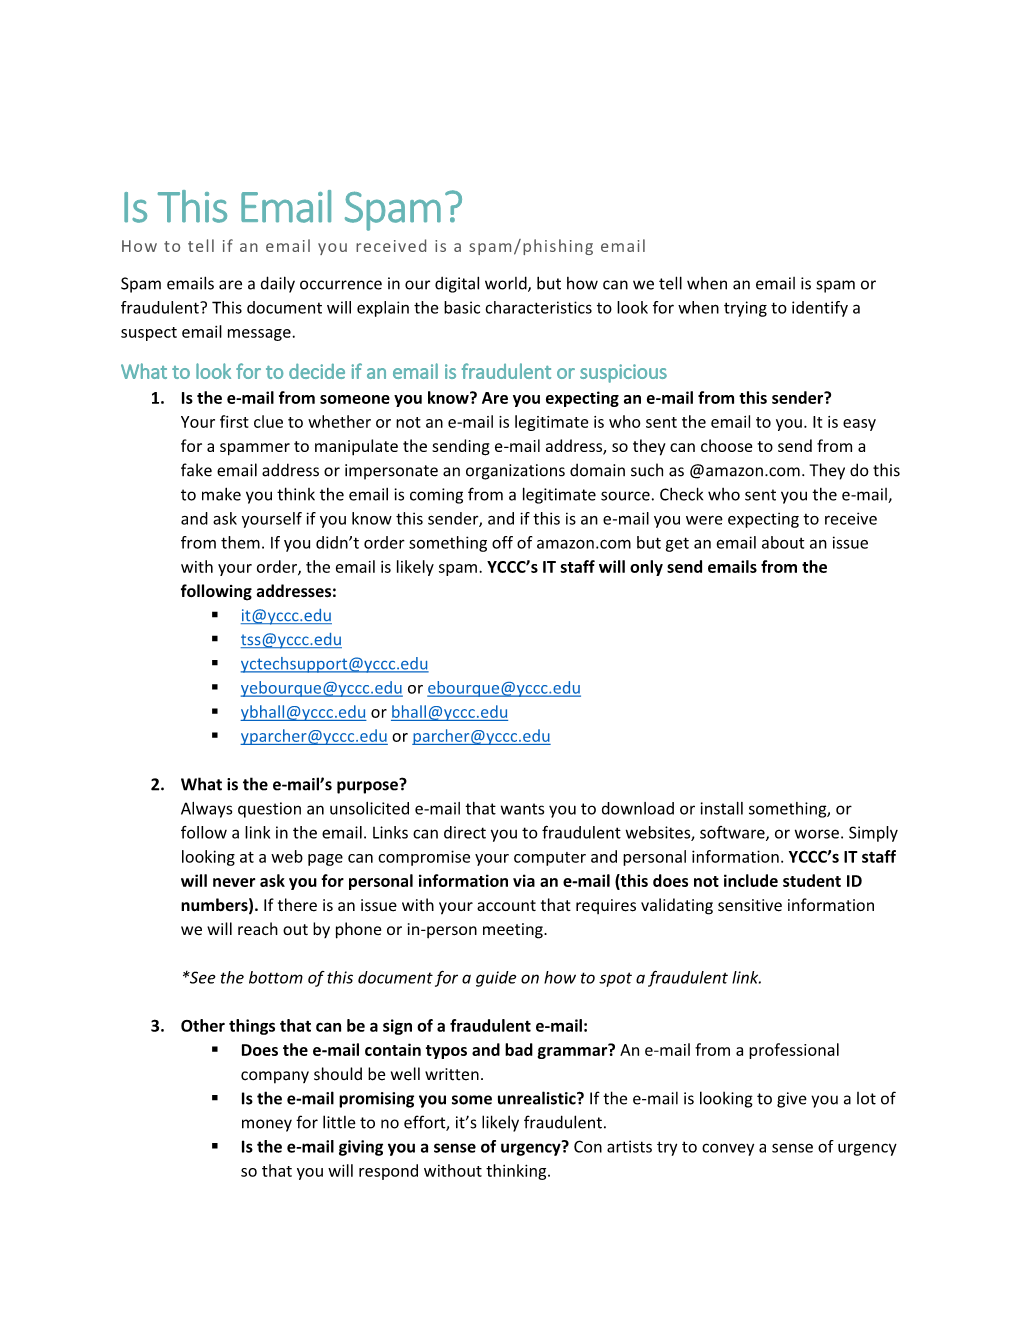 Is This Email Spam? How to Tell If an Email You Received Is a Spam/Phishing Email